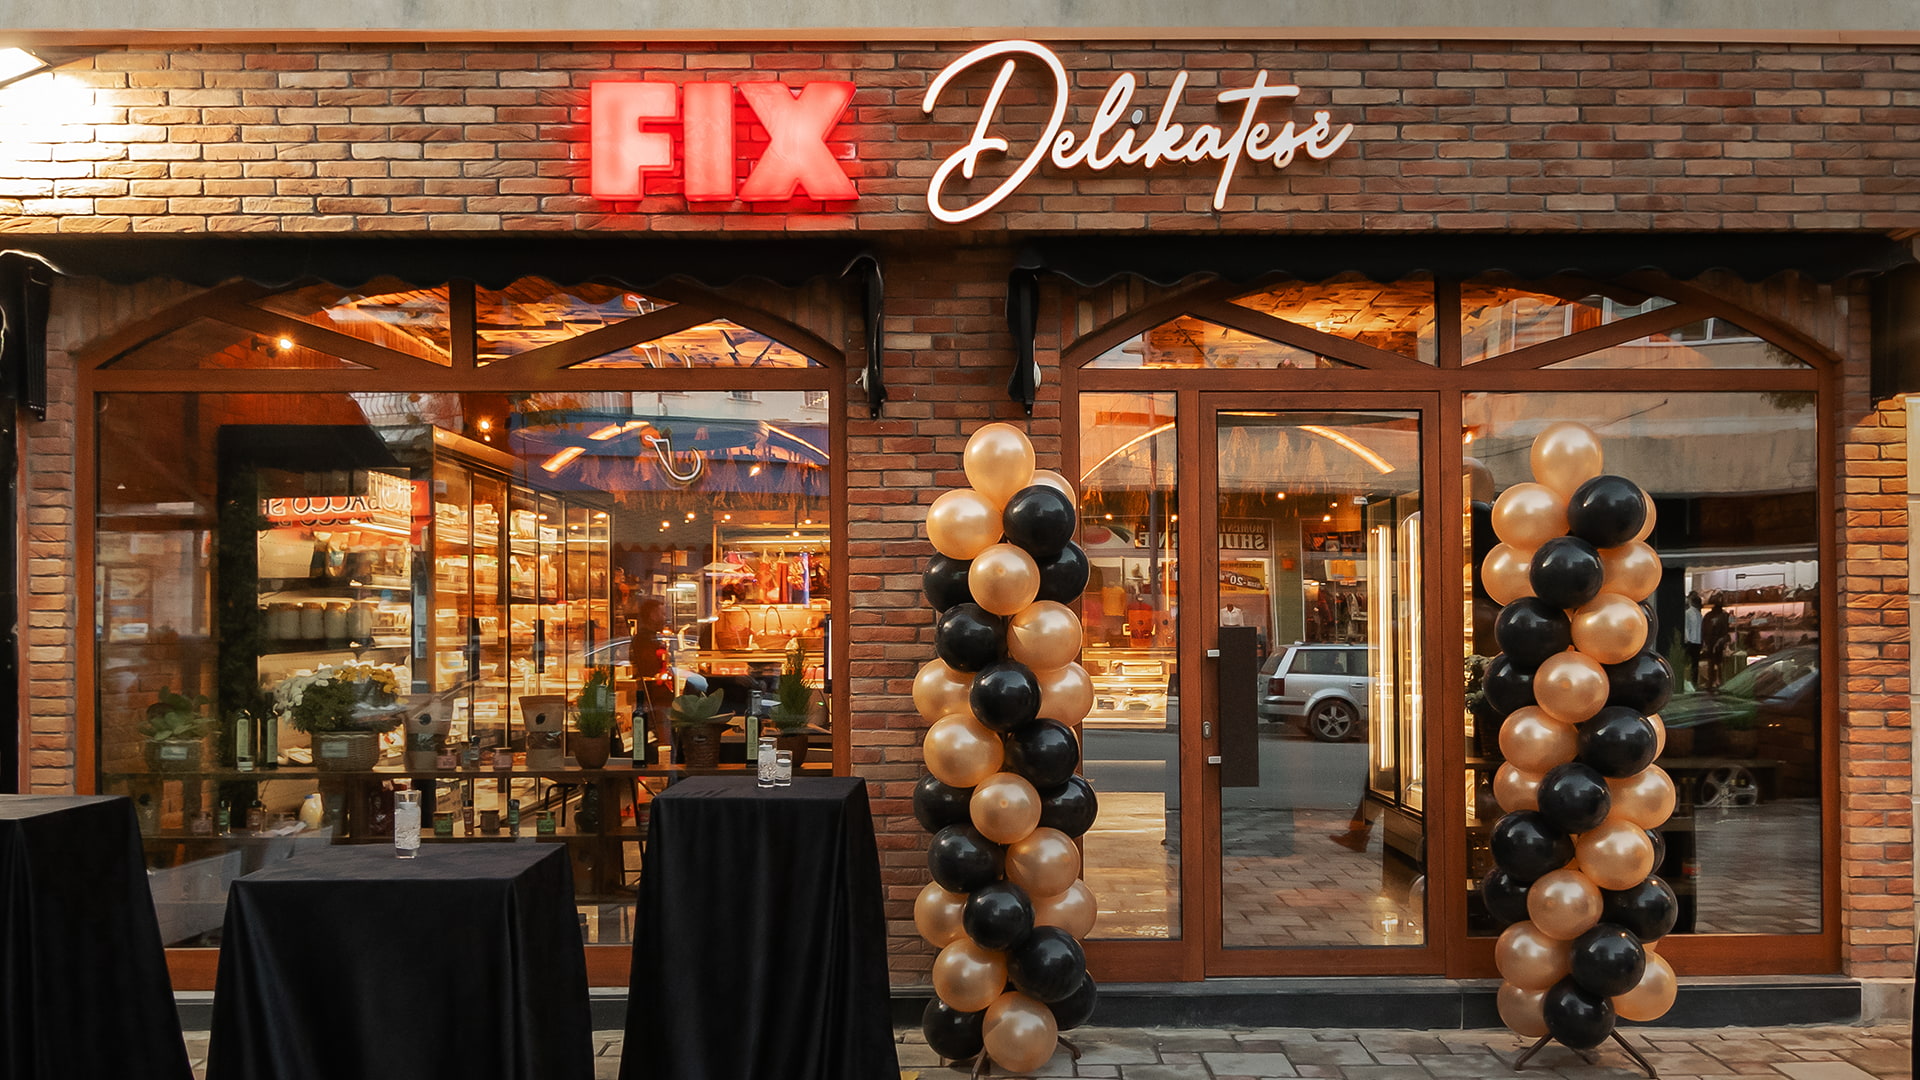 FIX DELIKATESË! Inauguration of the unique store in the city of Korça.